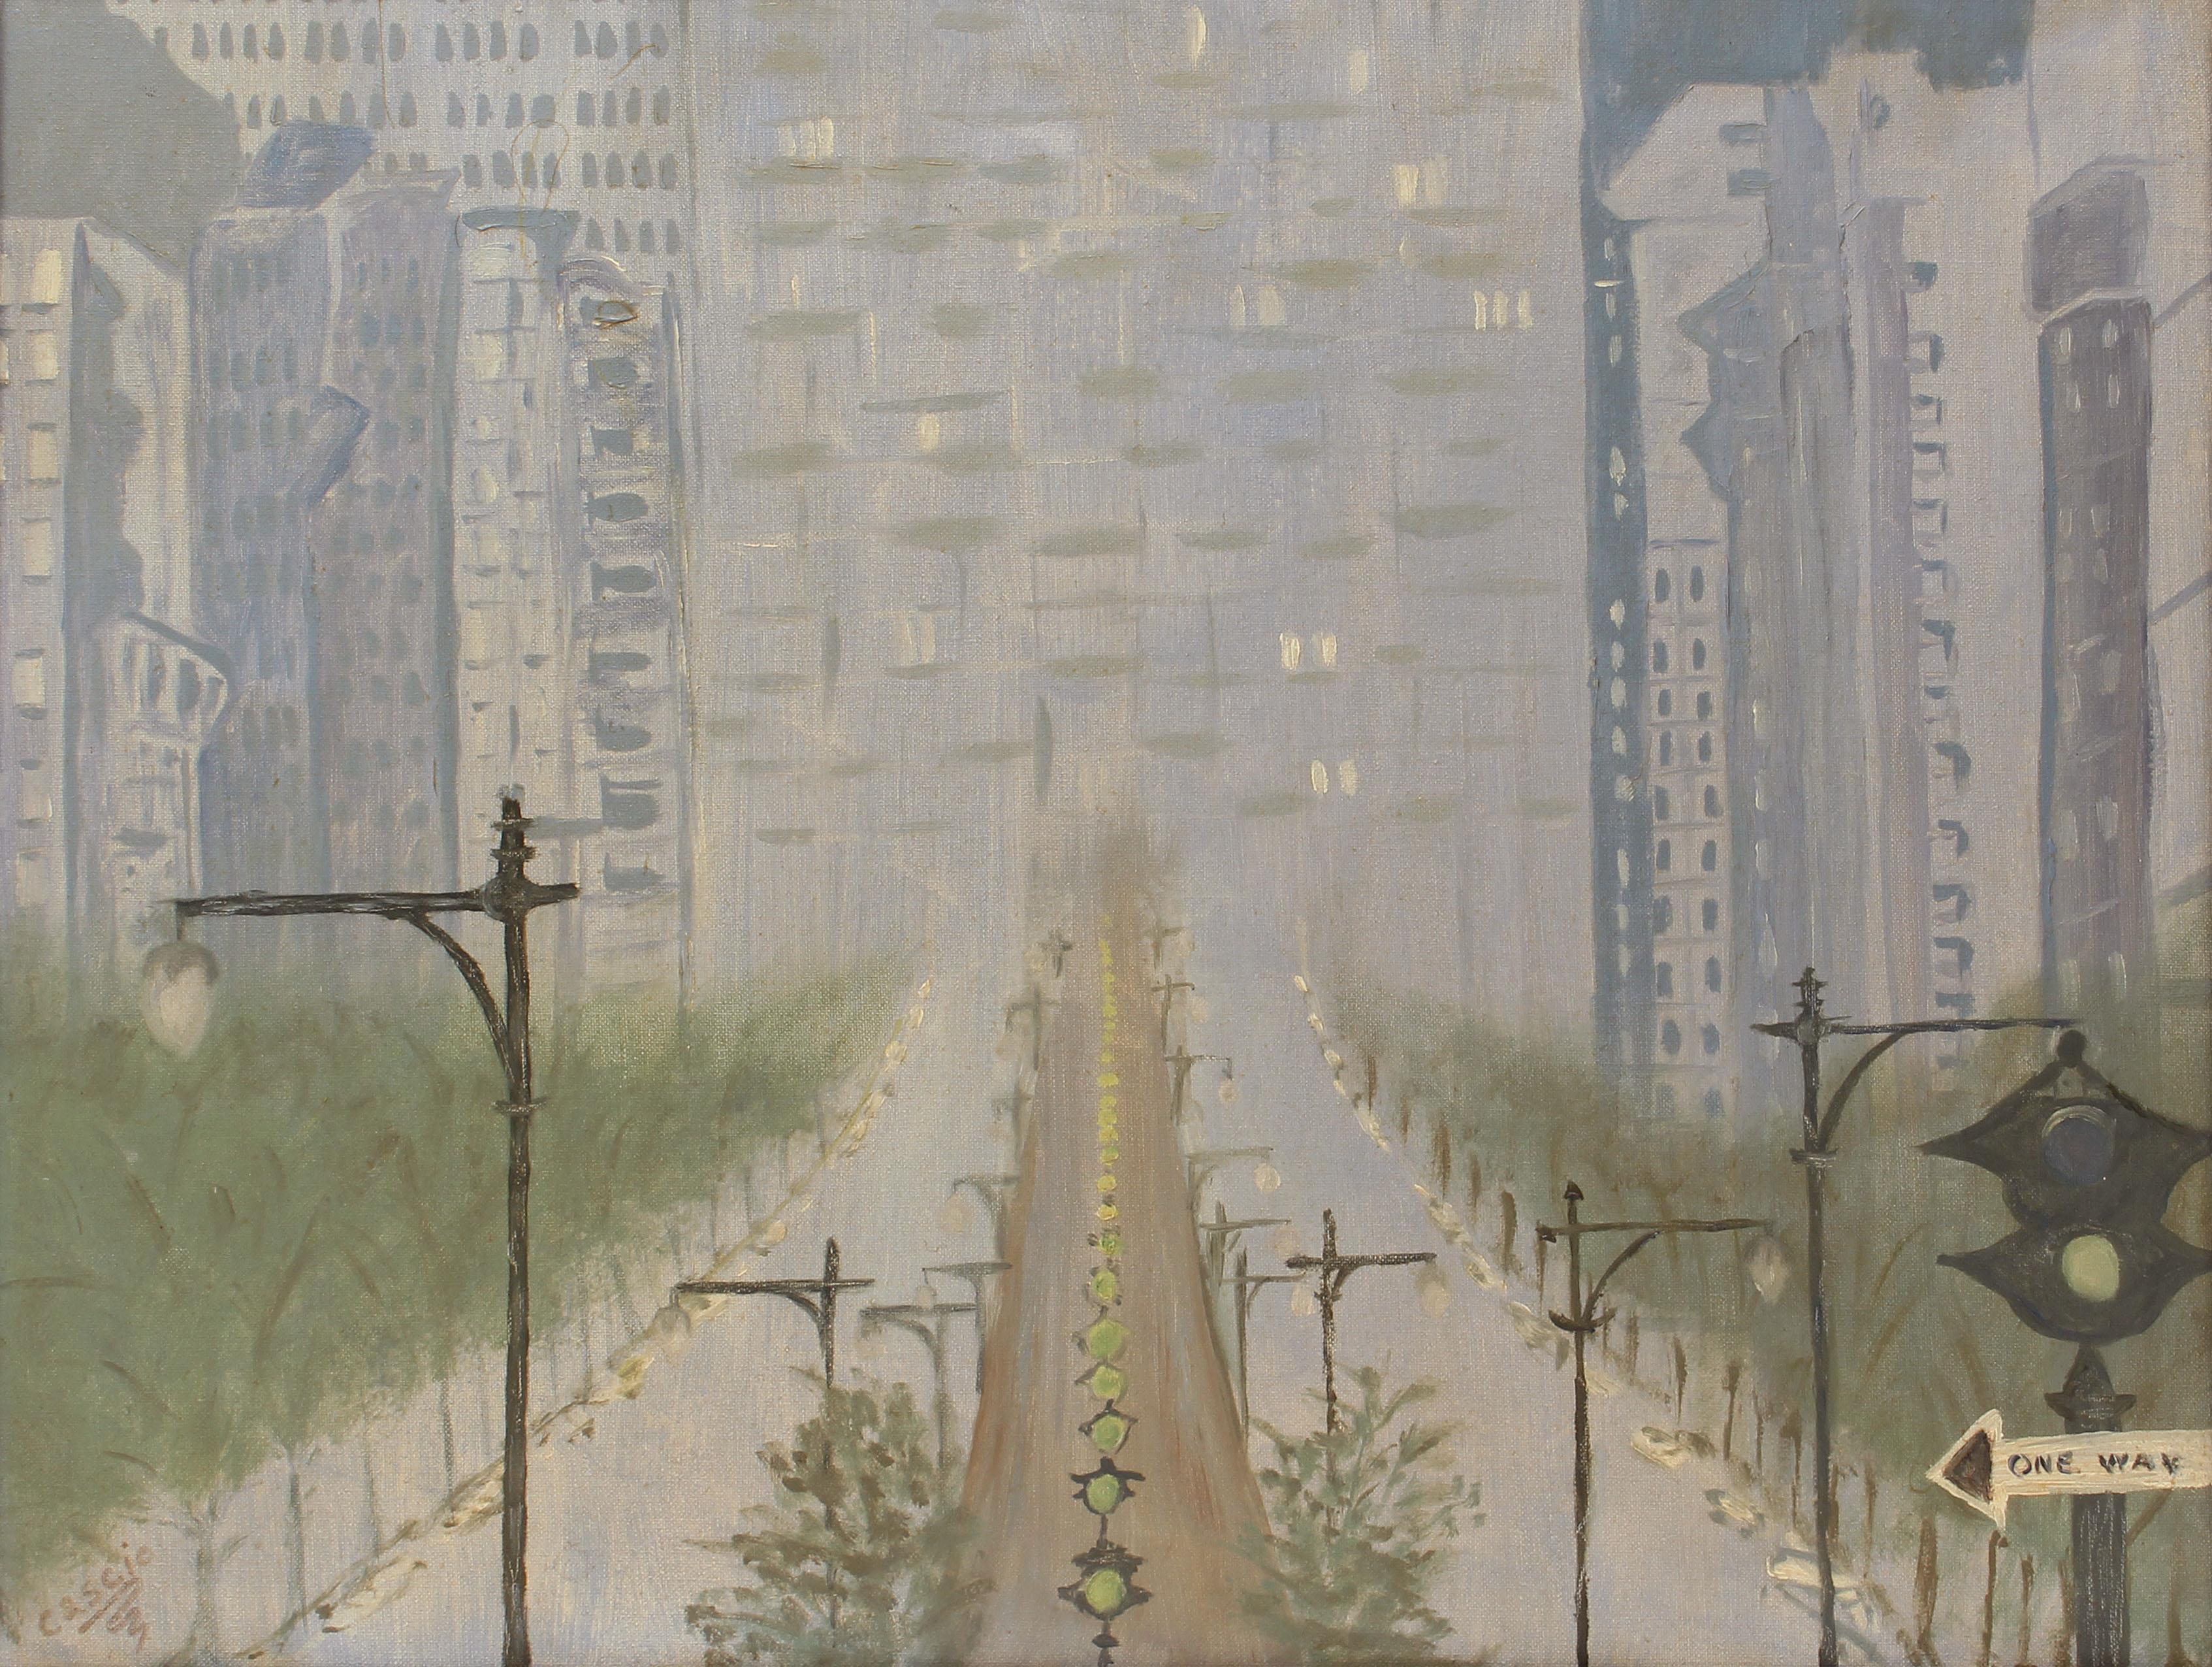 Modernist cityscape painting of Park avenue in New York City.  Oil on board, circa 1950.  Signed lower right illegibly.  Displayed in a modernist frame.  Image size, 24